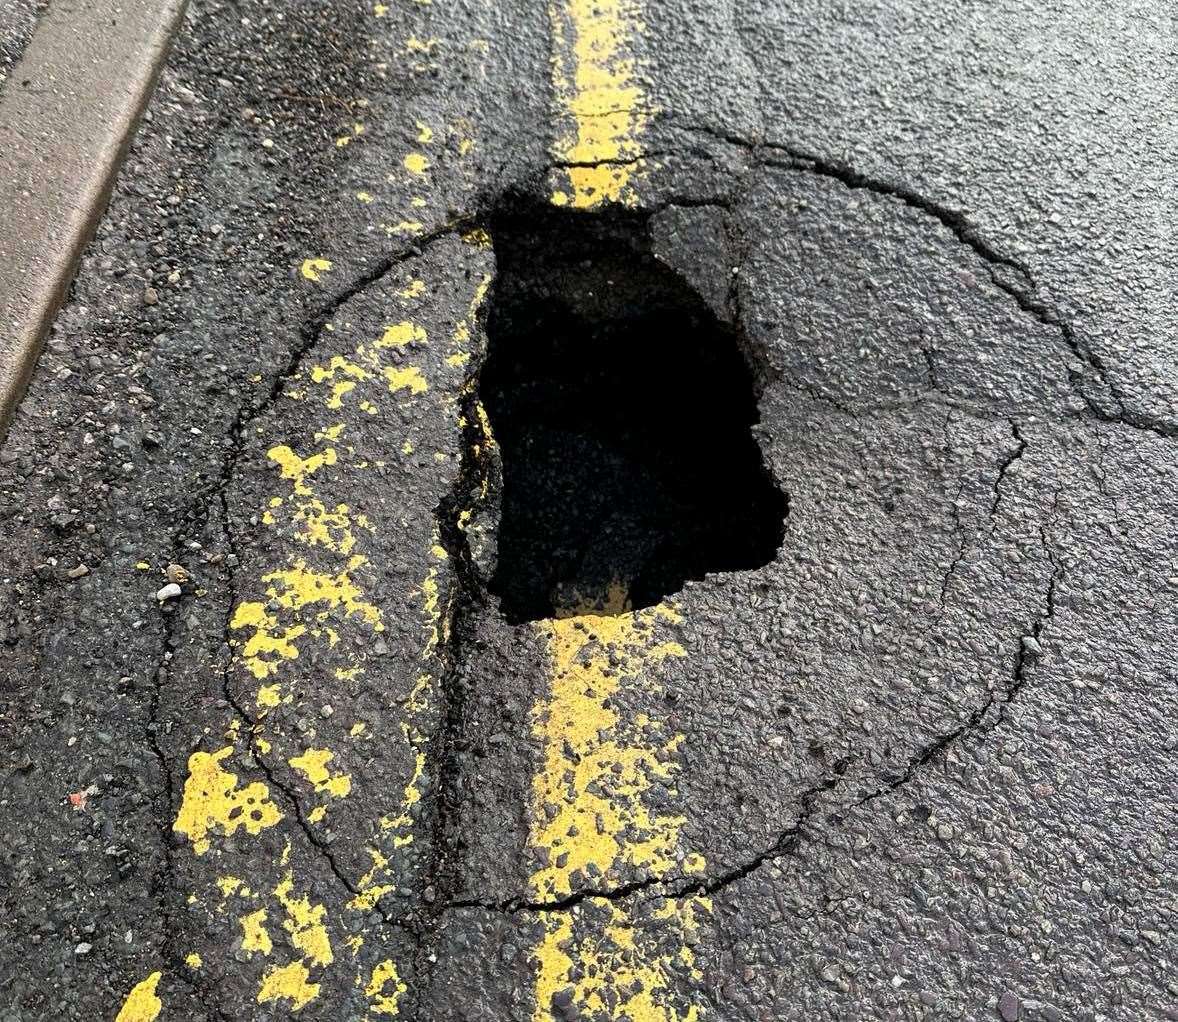 The hole is said to have appeared yesterday morning. Picture: Mark Steadman